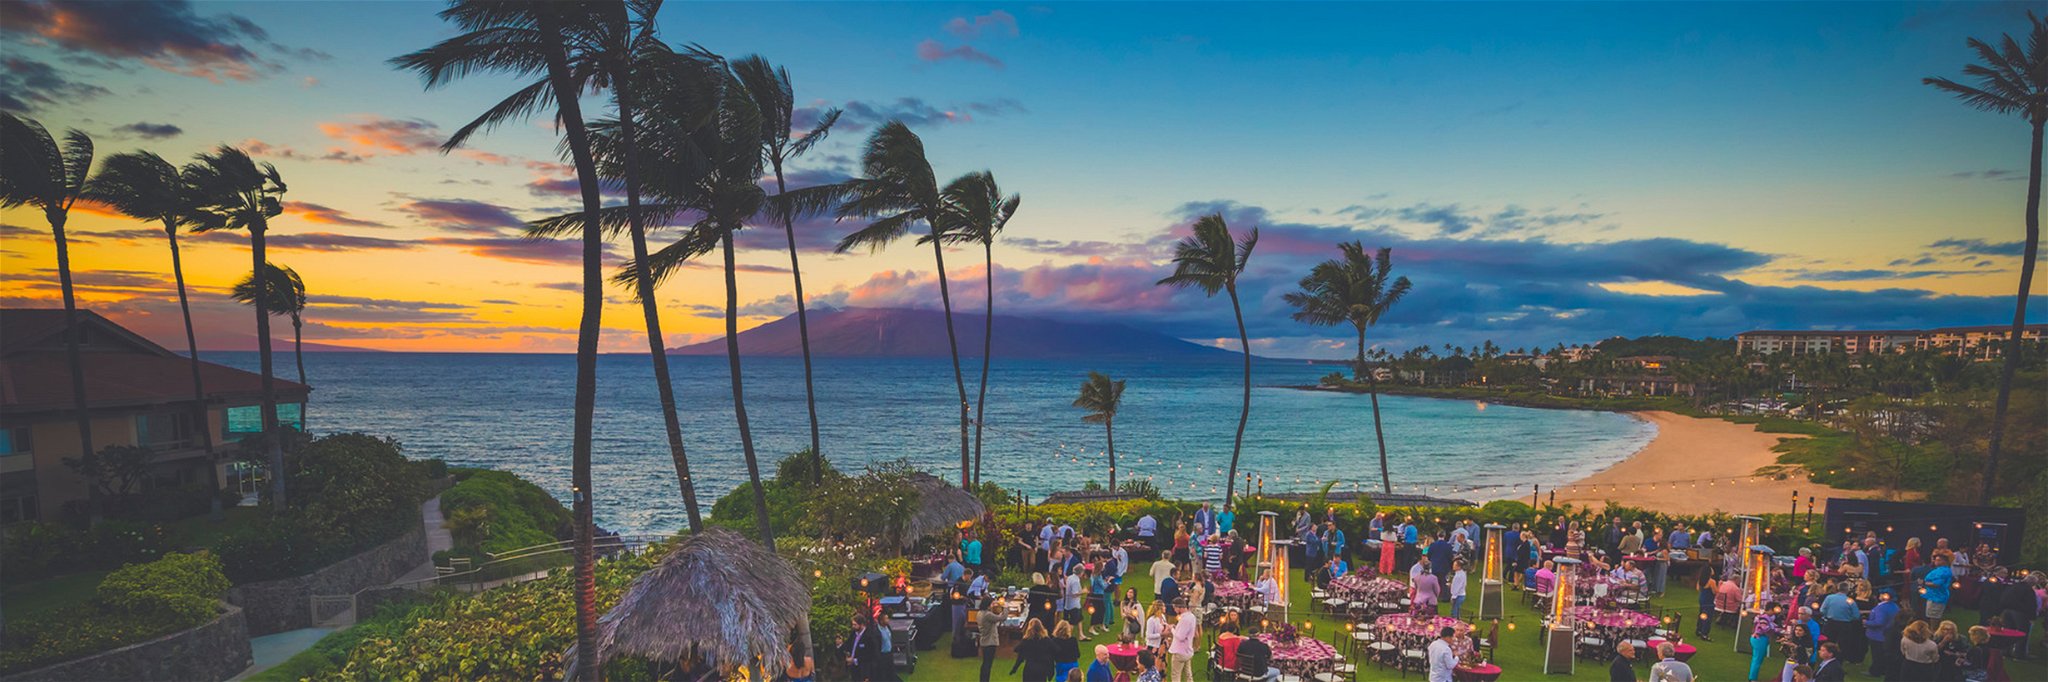 Labor Day Weekend Wine and Food Event at the Four Seasons Maui at Wailea.